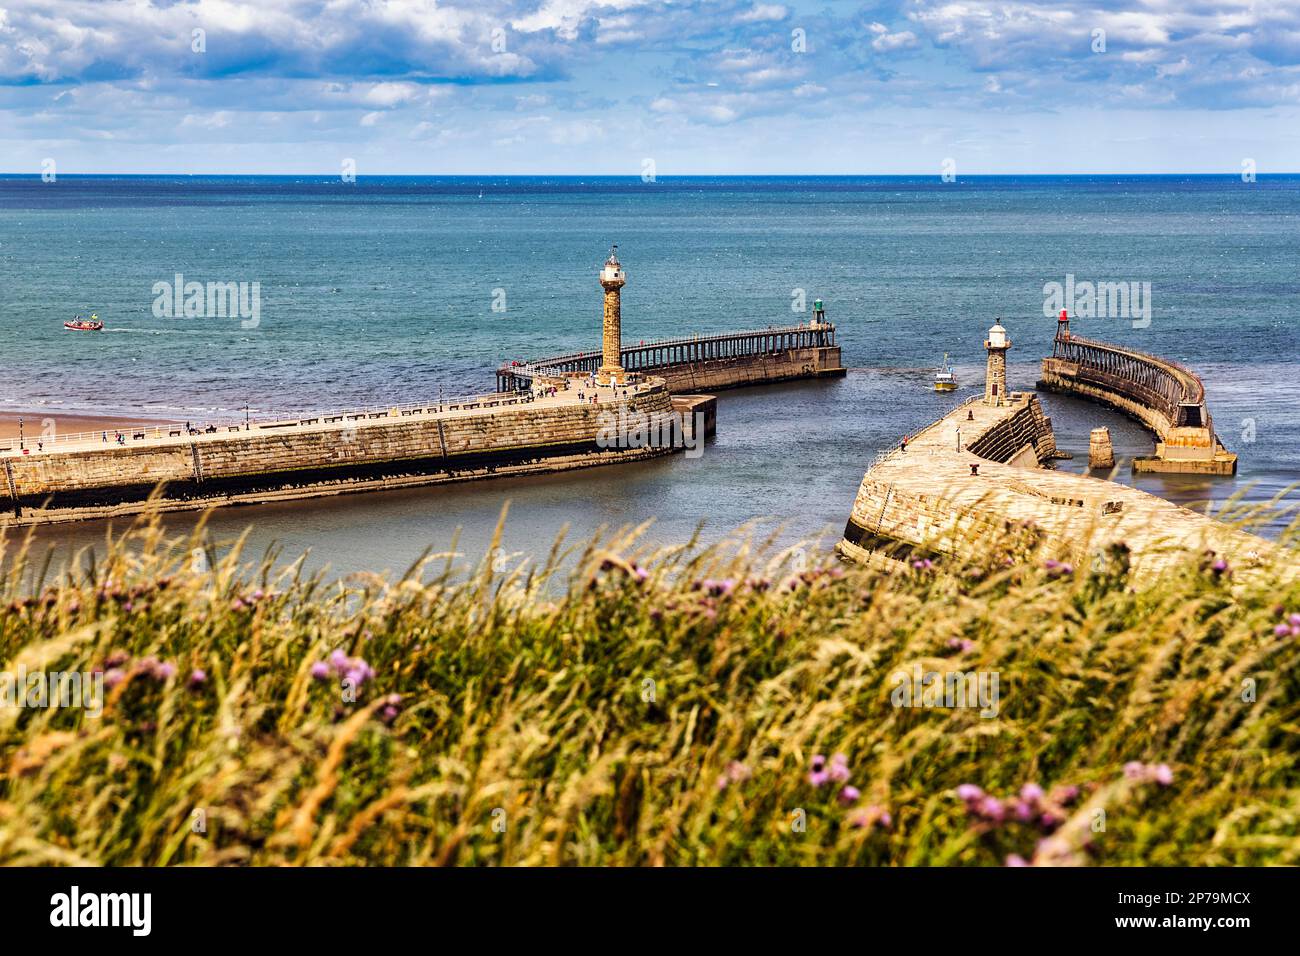 View of the harbour entrance, River Esk, mouth of the North Sea, Whitby, Yorkshire, England, United Kingdom Stock Photo